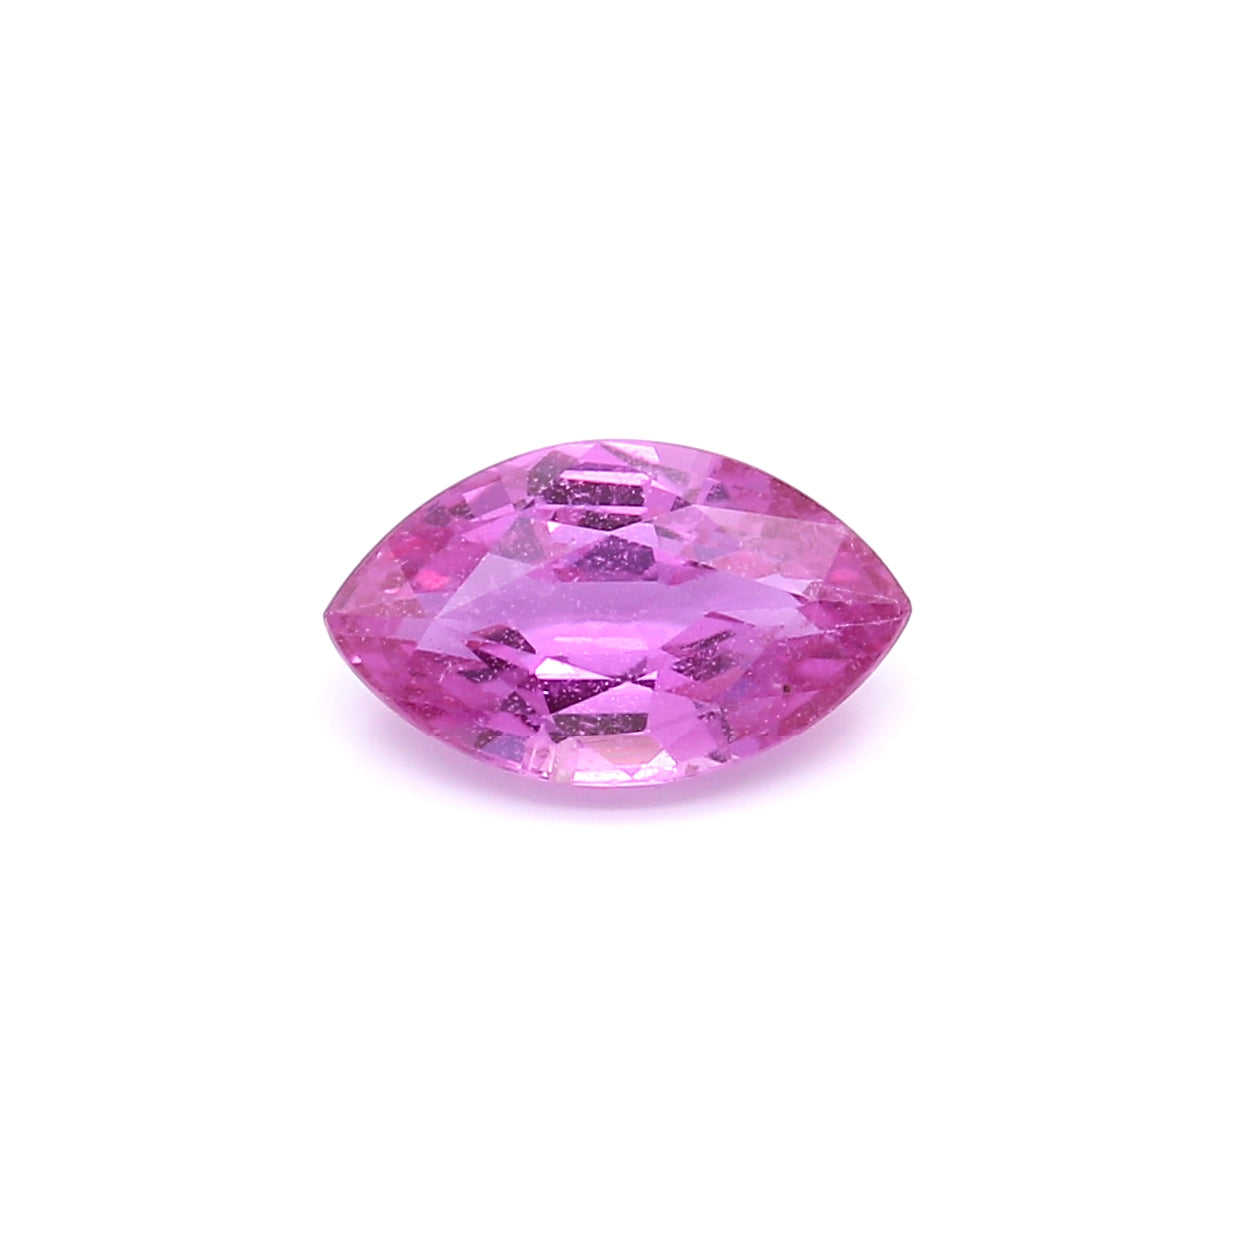 2.05ct Marquise, Pink Sapphire, Heated, Madagascar - 10.33 x 6.15 x 3.98mm